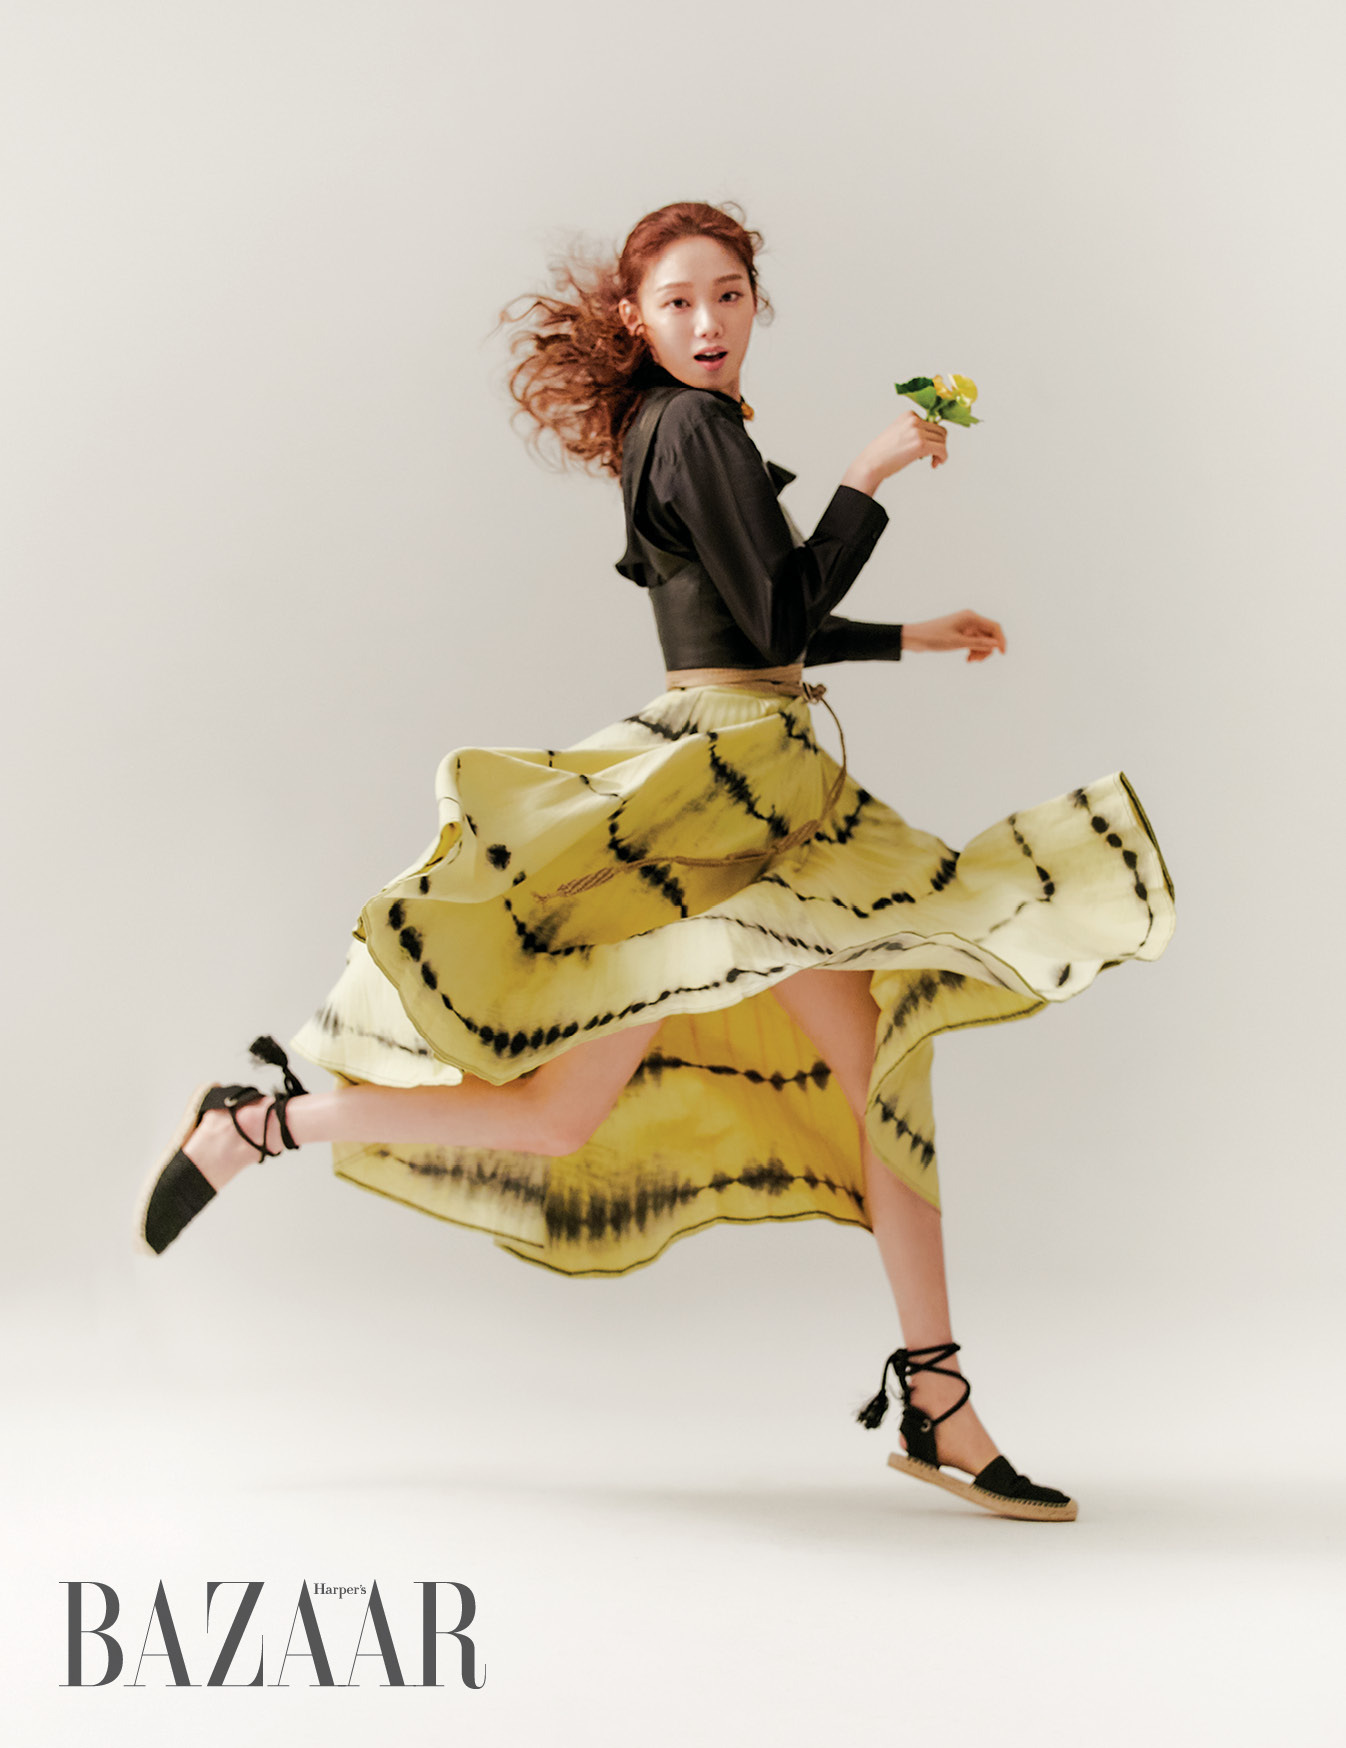 Seoul=) = A bright picture like the spring of Actor Lee Sung-kyung has been released.In a May issue pictorial released by the magazine Bazaar on Sunday, Lee Sung-kyung emanated a fresh look that resembled Spring flowrs.The concept of this picture is Fly High. High and Far, and Lee Sung-kyung has digested it with his own unique mood.Wearing a long skirt like a flower, we have completed a charming and fascinating picture, such as showing a dynamic pose or moving freely on a trampoline.Lee Sung-kyungs refreshing energy, which filled the scene throughout the shoot, is the back door that the surrounding staff also laughed.Meanwhile, Lee Sung-kyung played the role of Cha Eun-jae in the second year of the thoracic surgery fellow through SBS drama Romantic Doctor Kim Sabu 2 which was broadcast earlier this year.I naturally played the image of youth growing up over the pain and got sympathy from viewers.